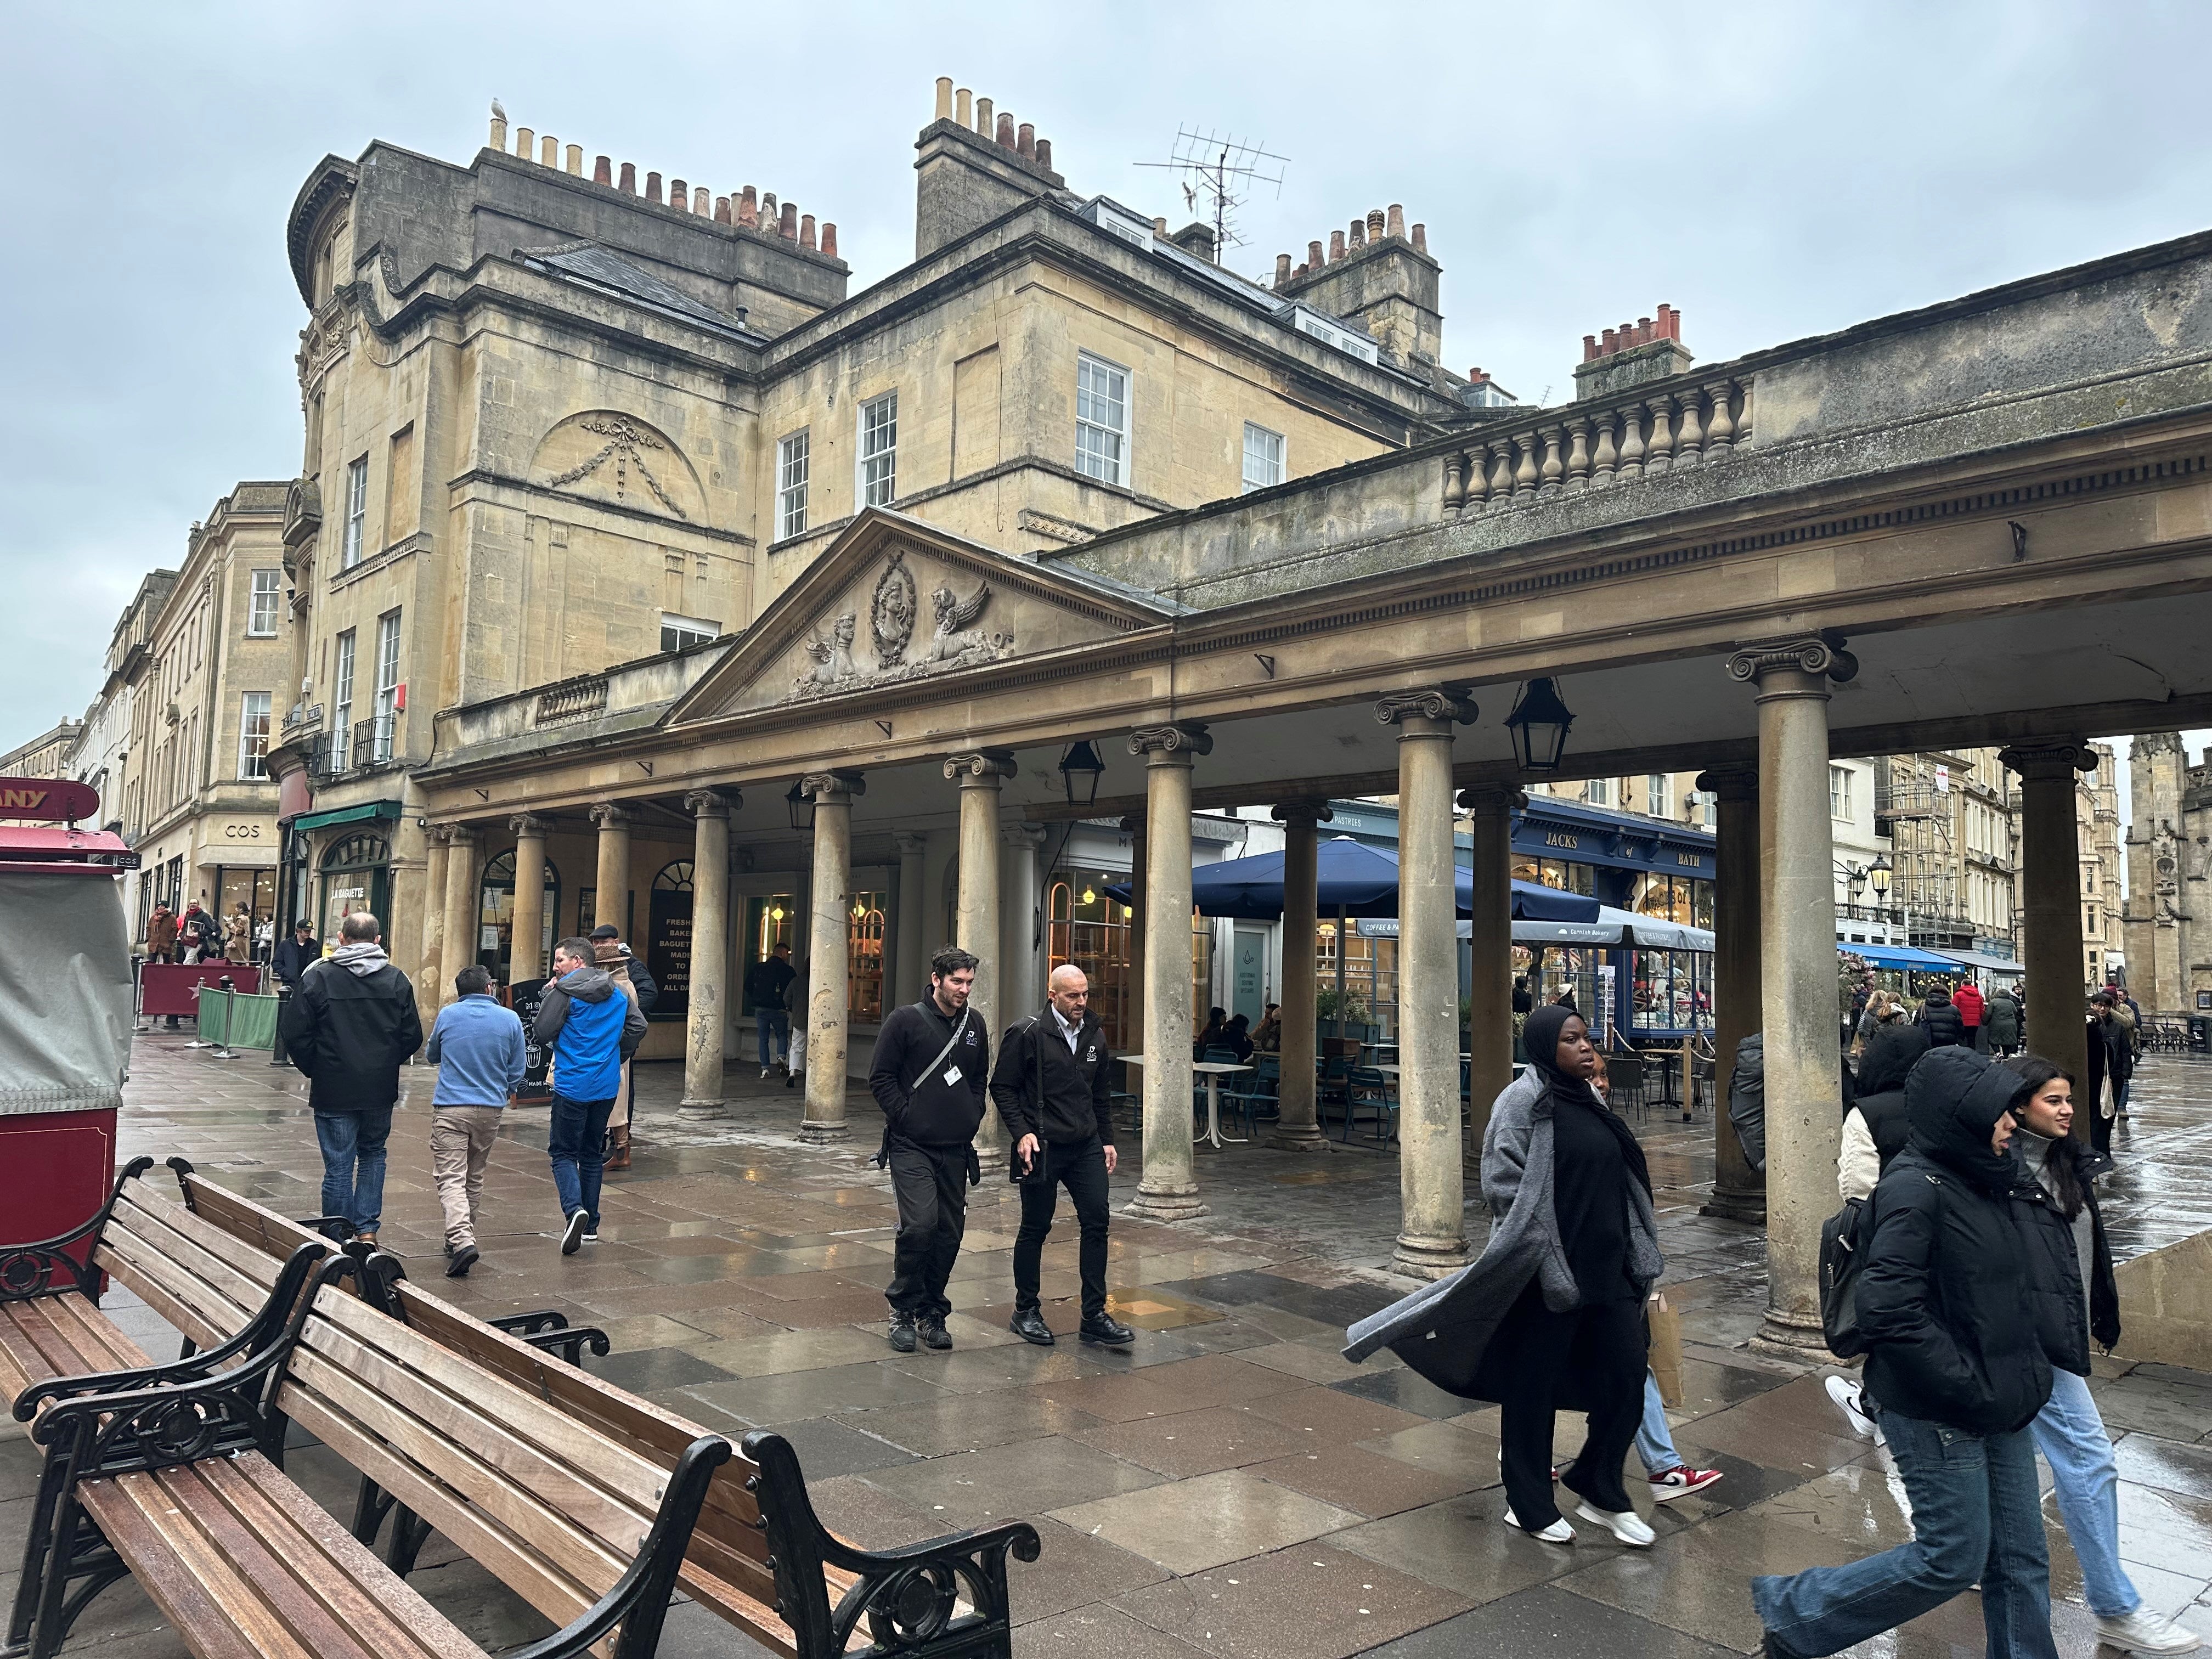 The damp weather doesn’t put tourists off Bath as visitors marvel at its many attractions